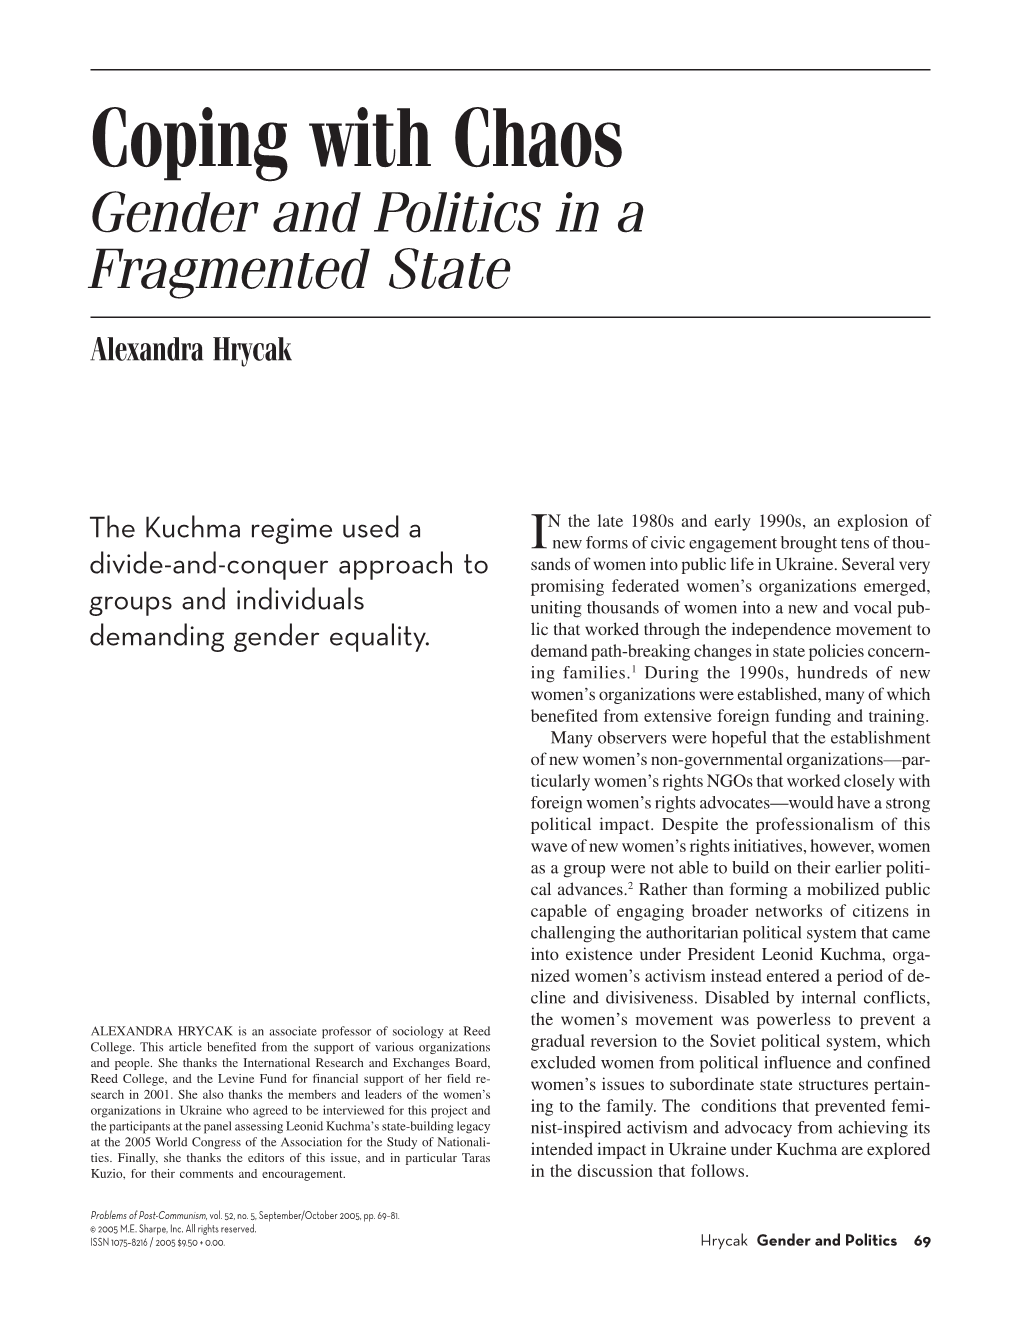 Coping with Chaos: Gender and Politics in a Fragmented State